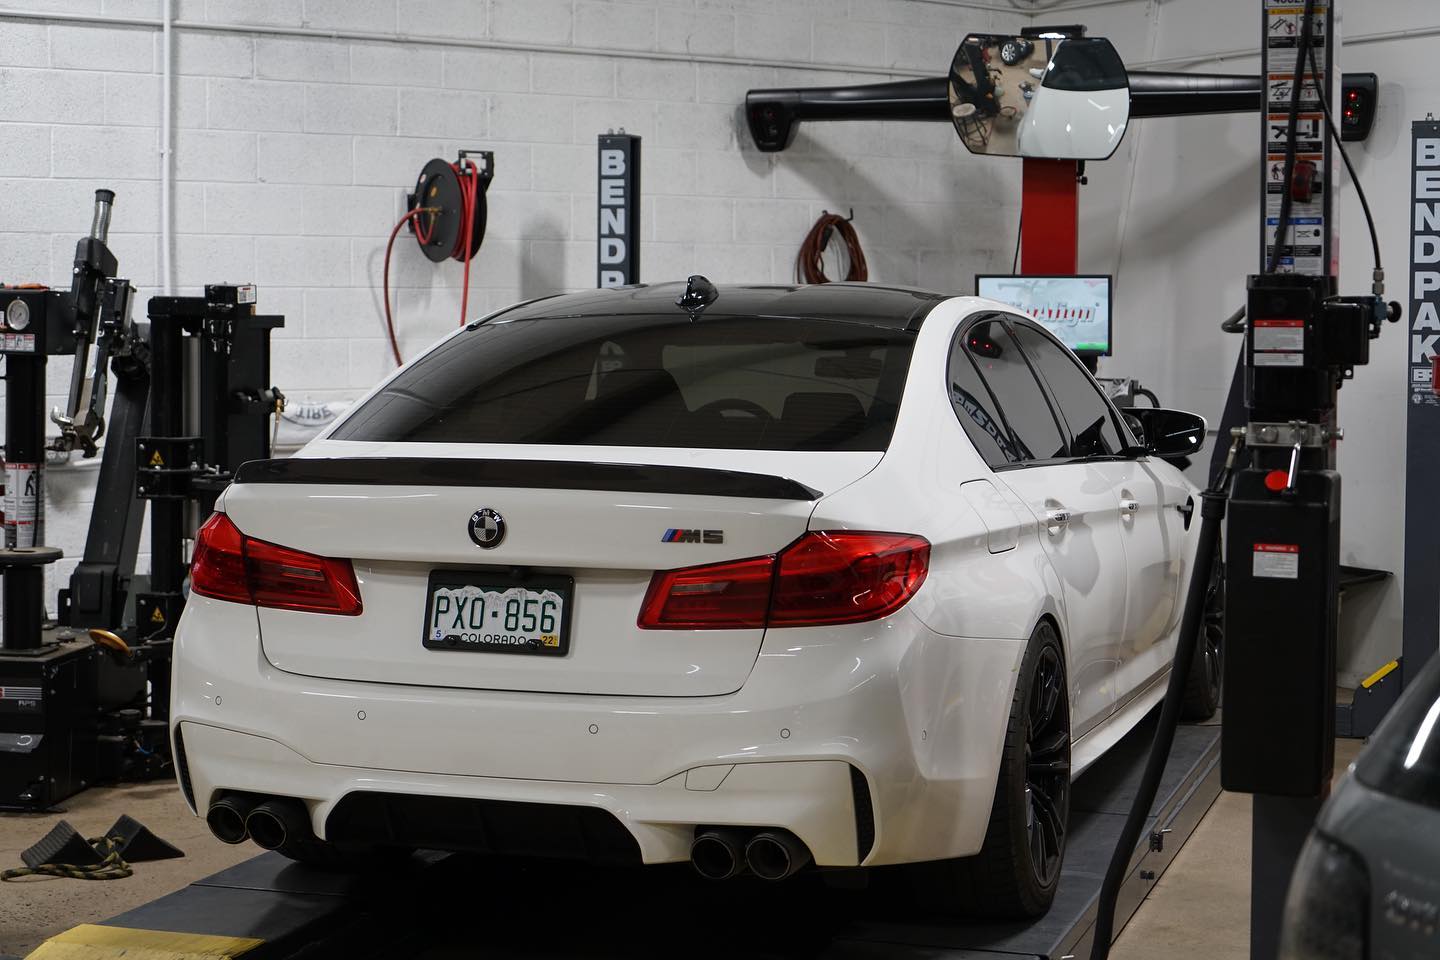 When you bring your vehicle to us for BMW diagnostic service, you know that it is in good hands